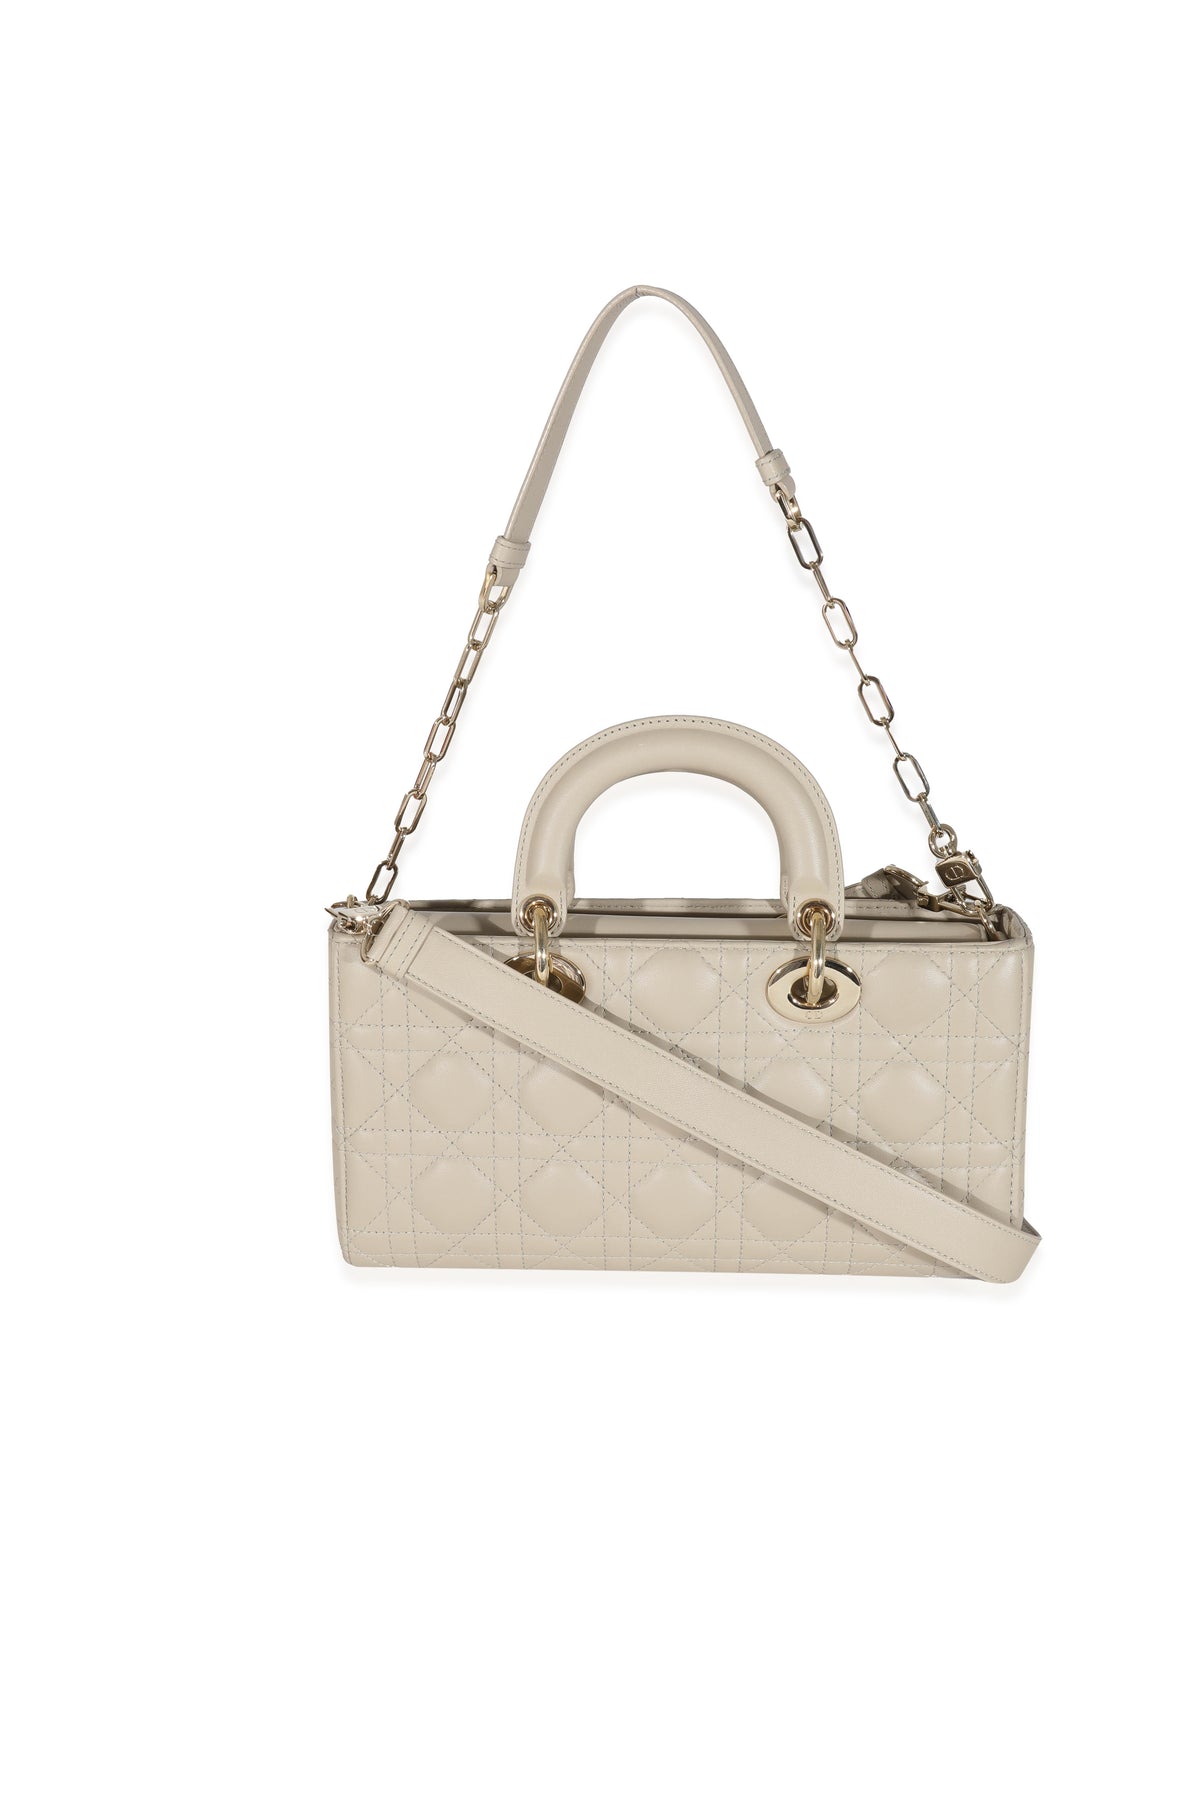 Miss Dior Chain Pouch Sand-Colored Cannage Lambskin